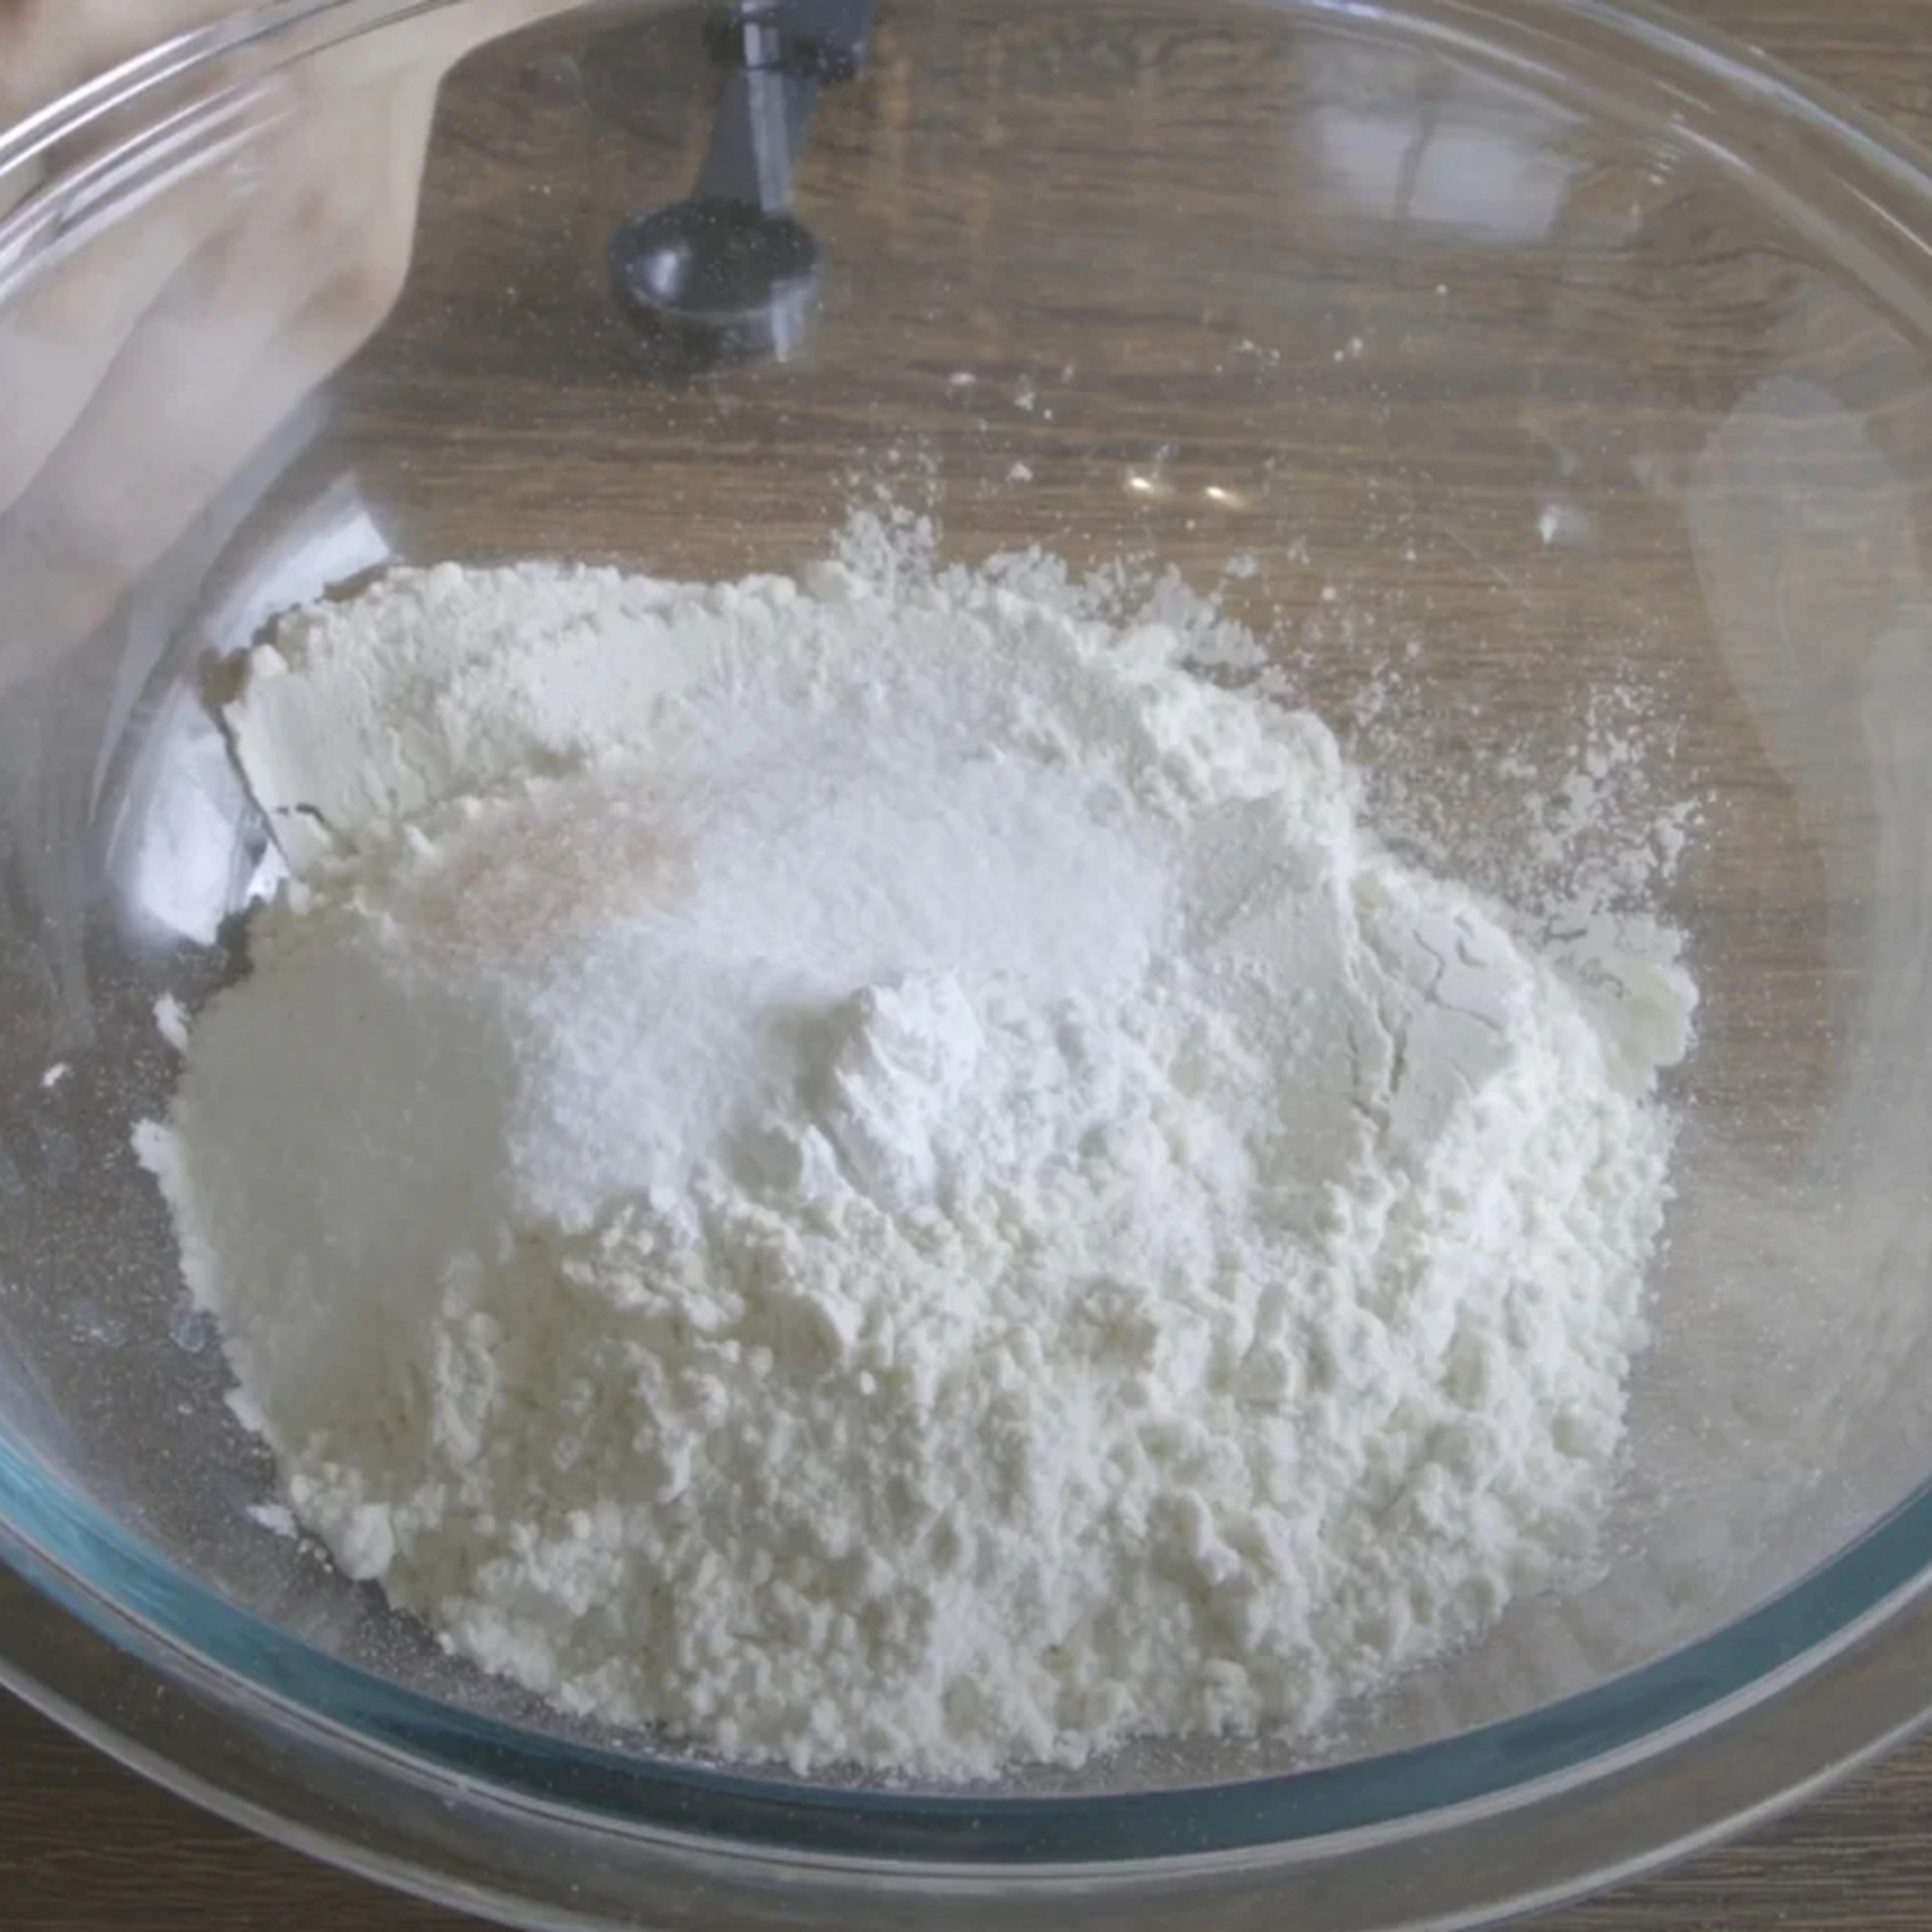 Prepare all dry ingredients in another bowl.